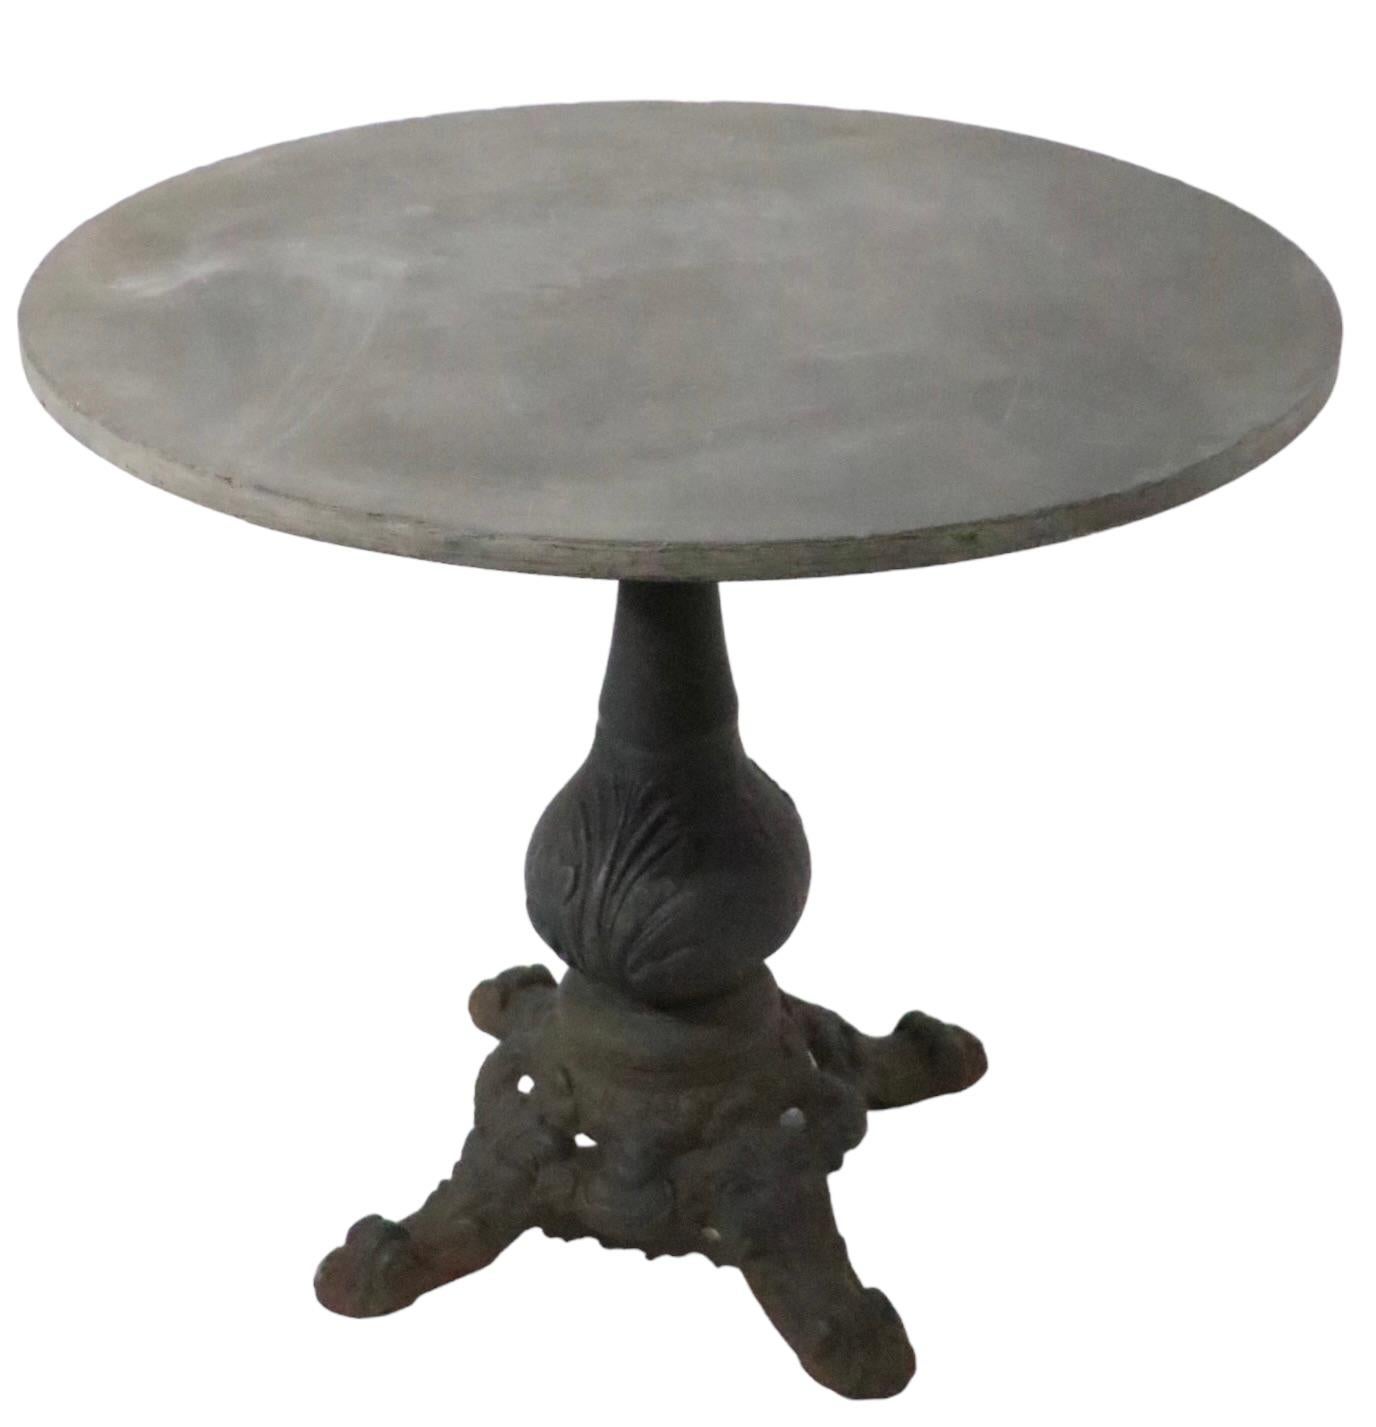 American Granite Top Cast Iron Base French Style Cafe Bistro Garden Table c 1920 - 1950s For Sale